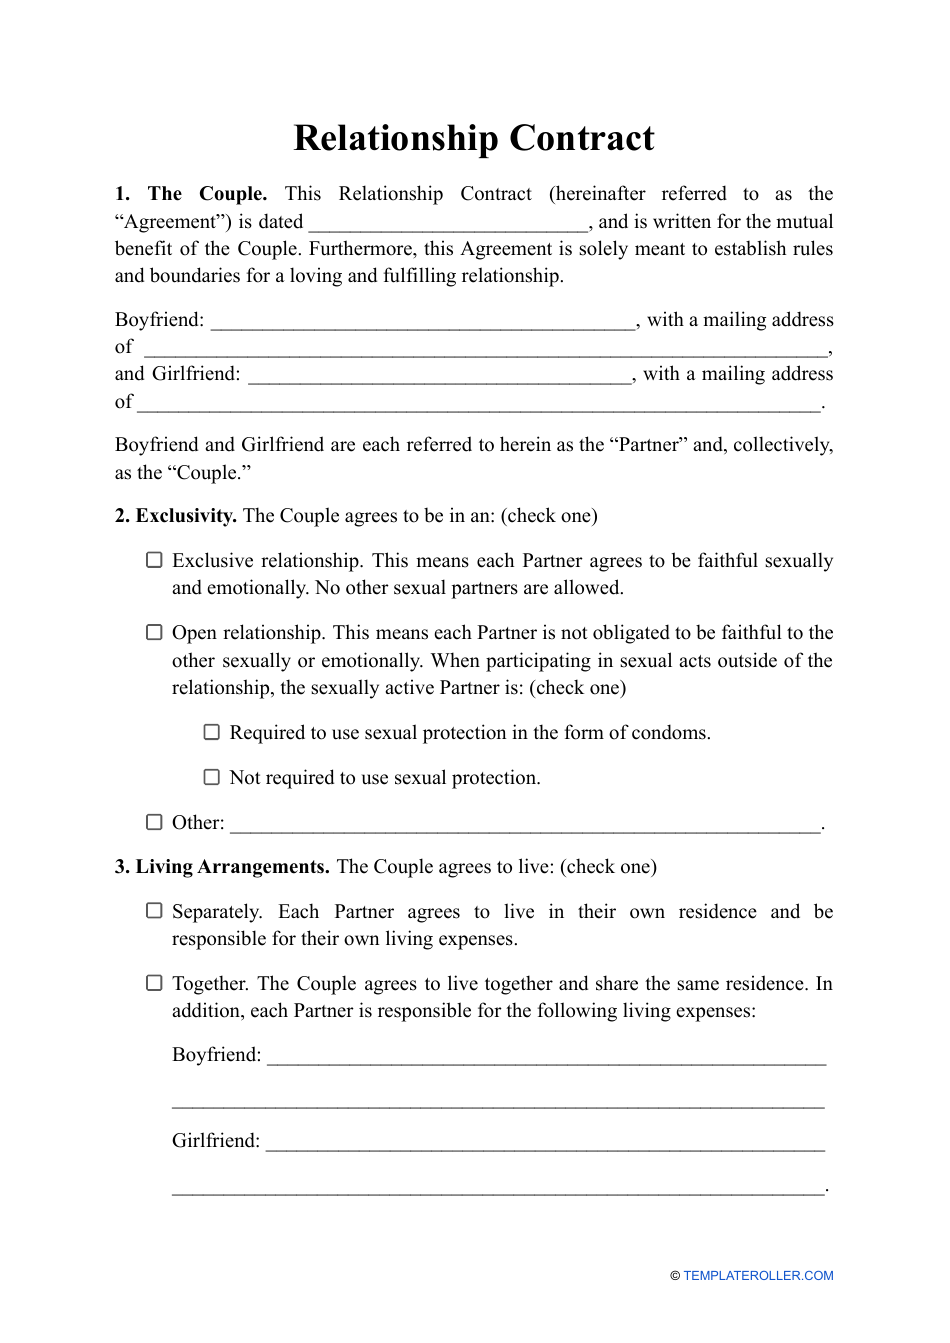 Relationship Contract Template, Page 1